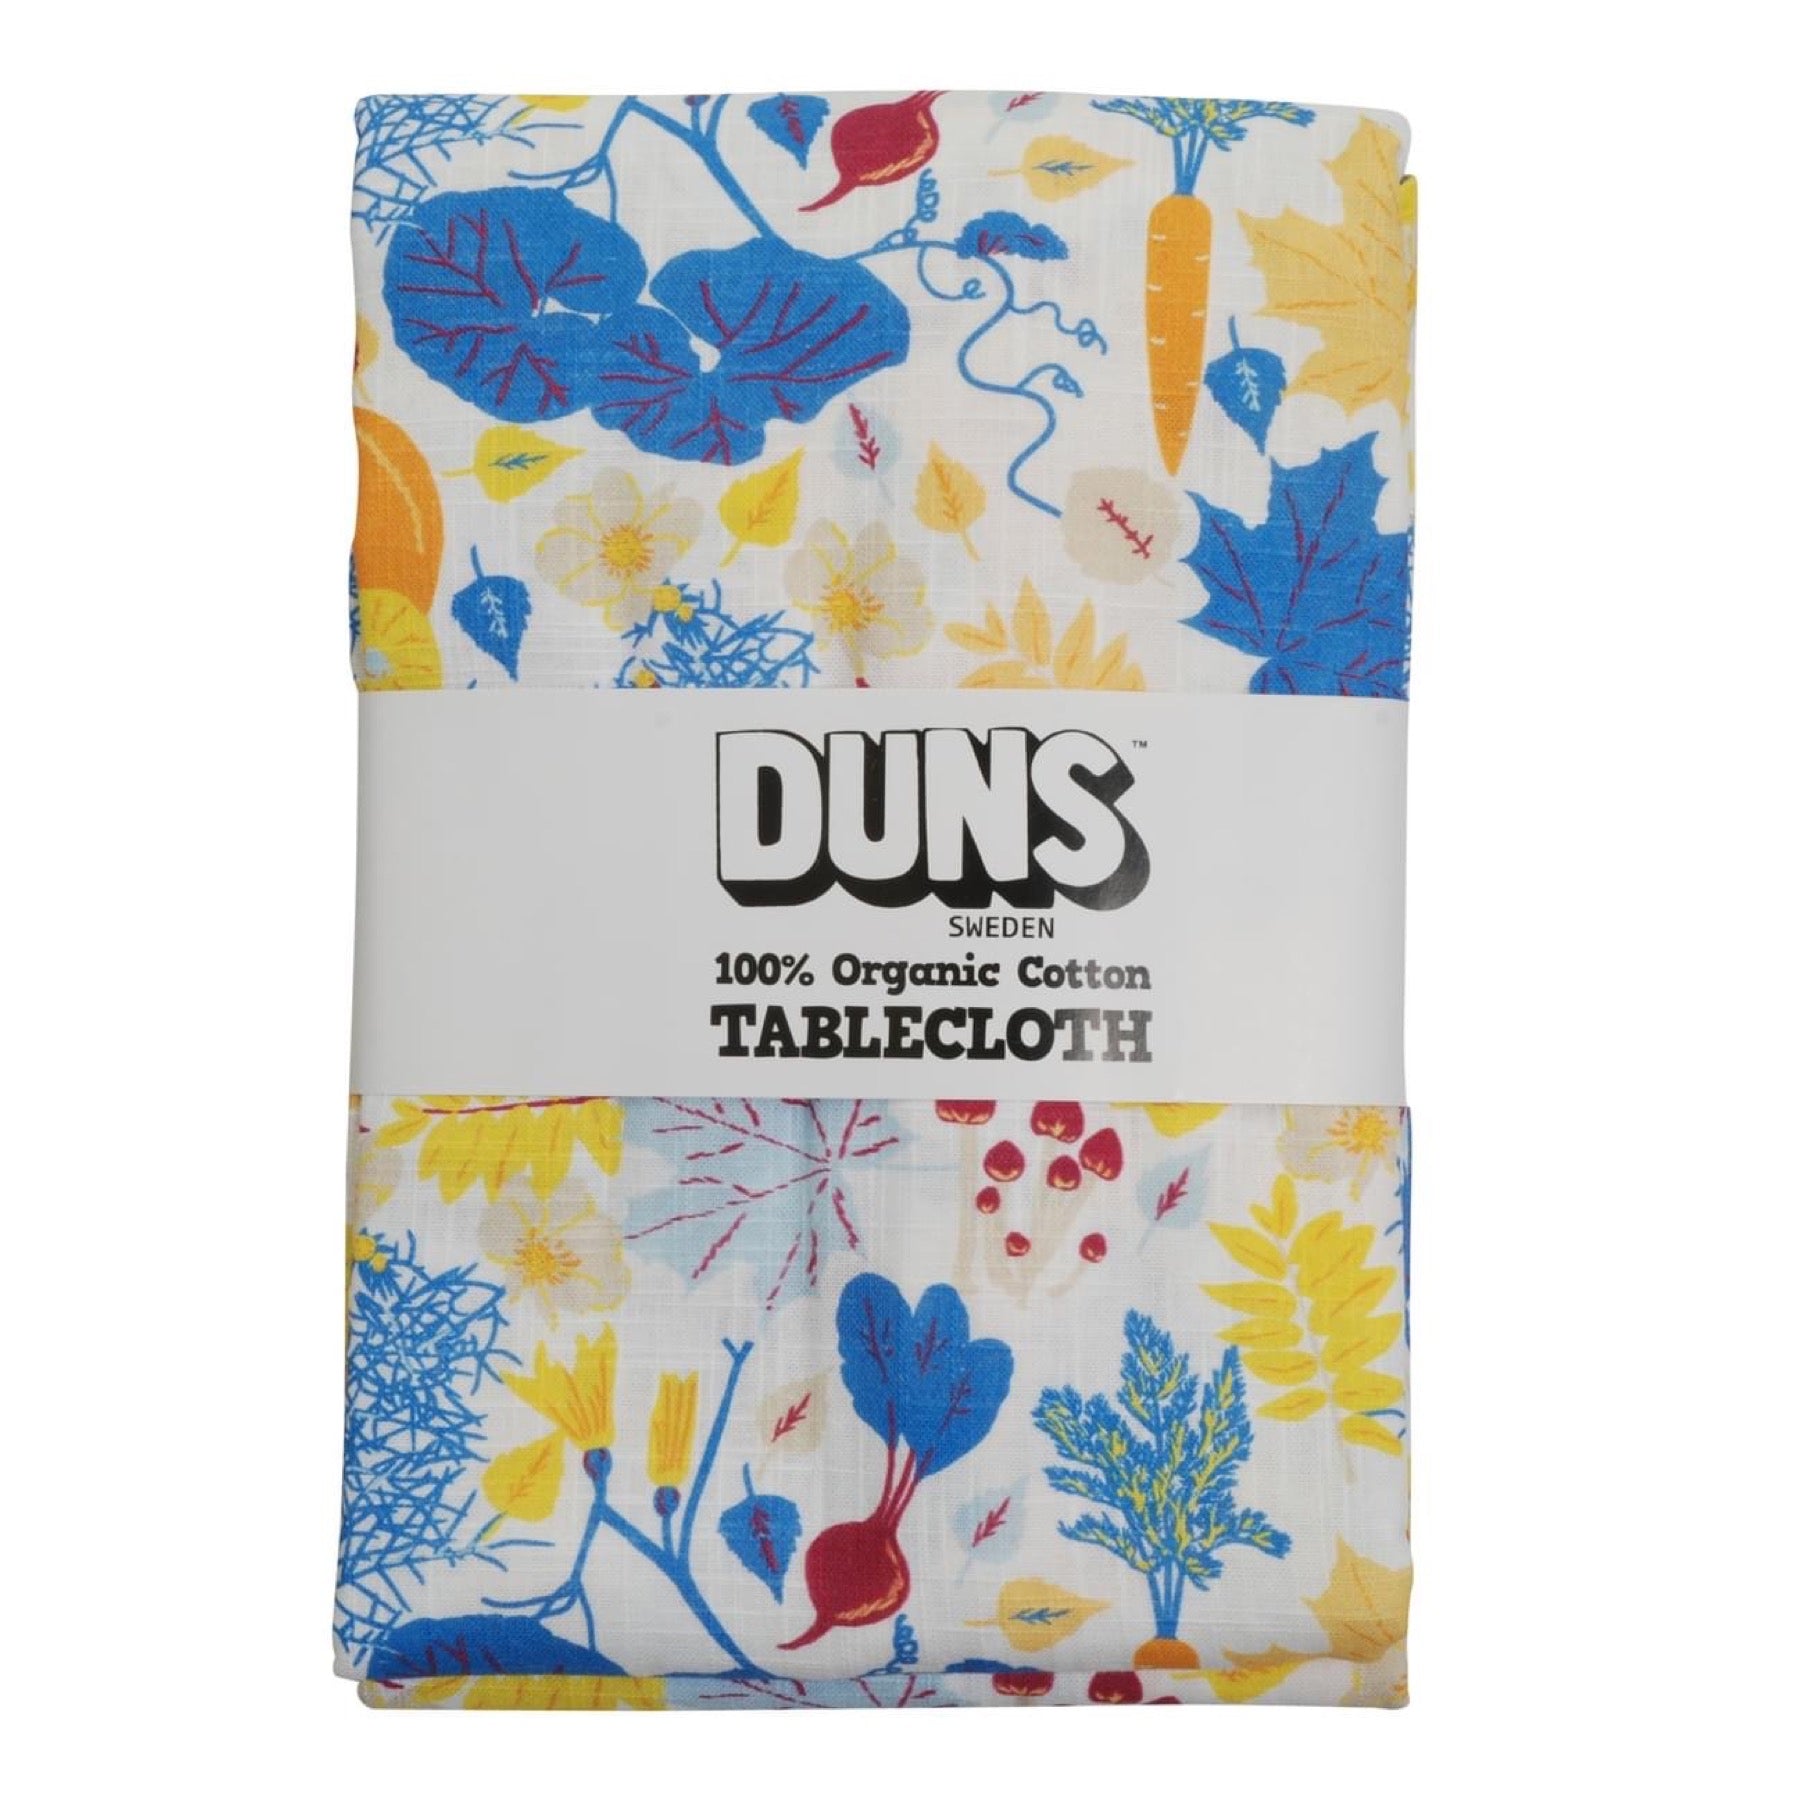 DUNS Sweden Tablecloth Fall Flowers Blue